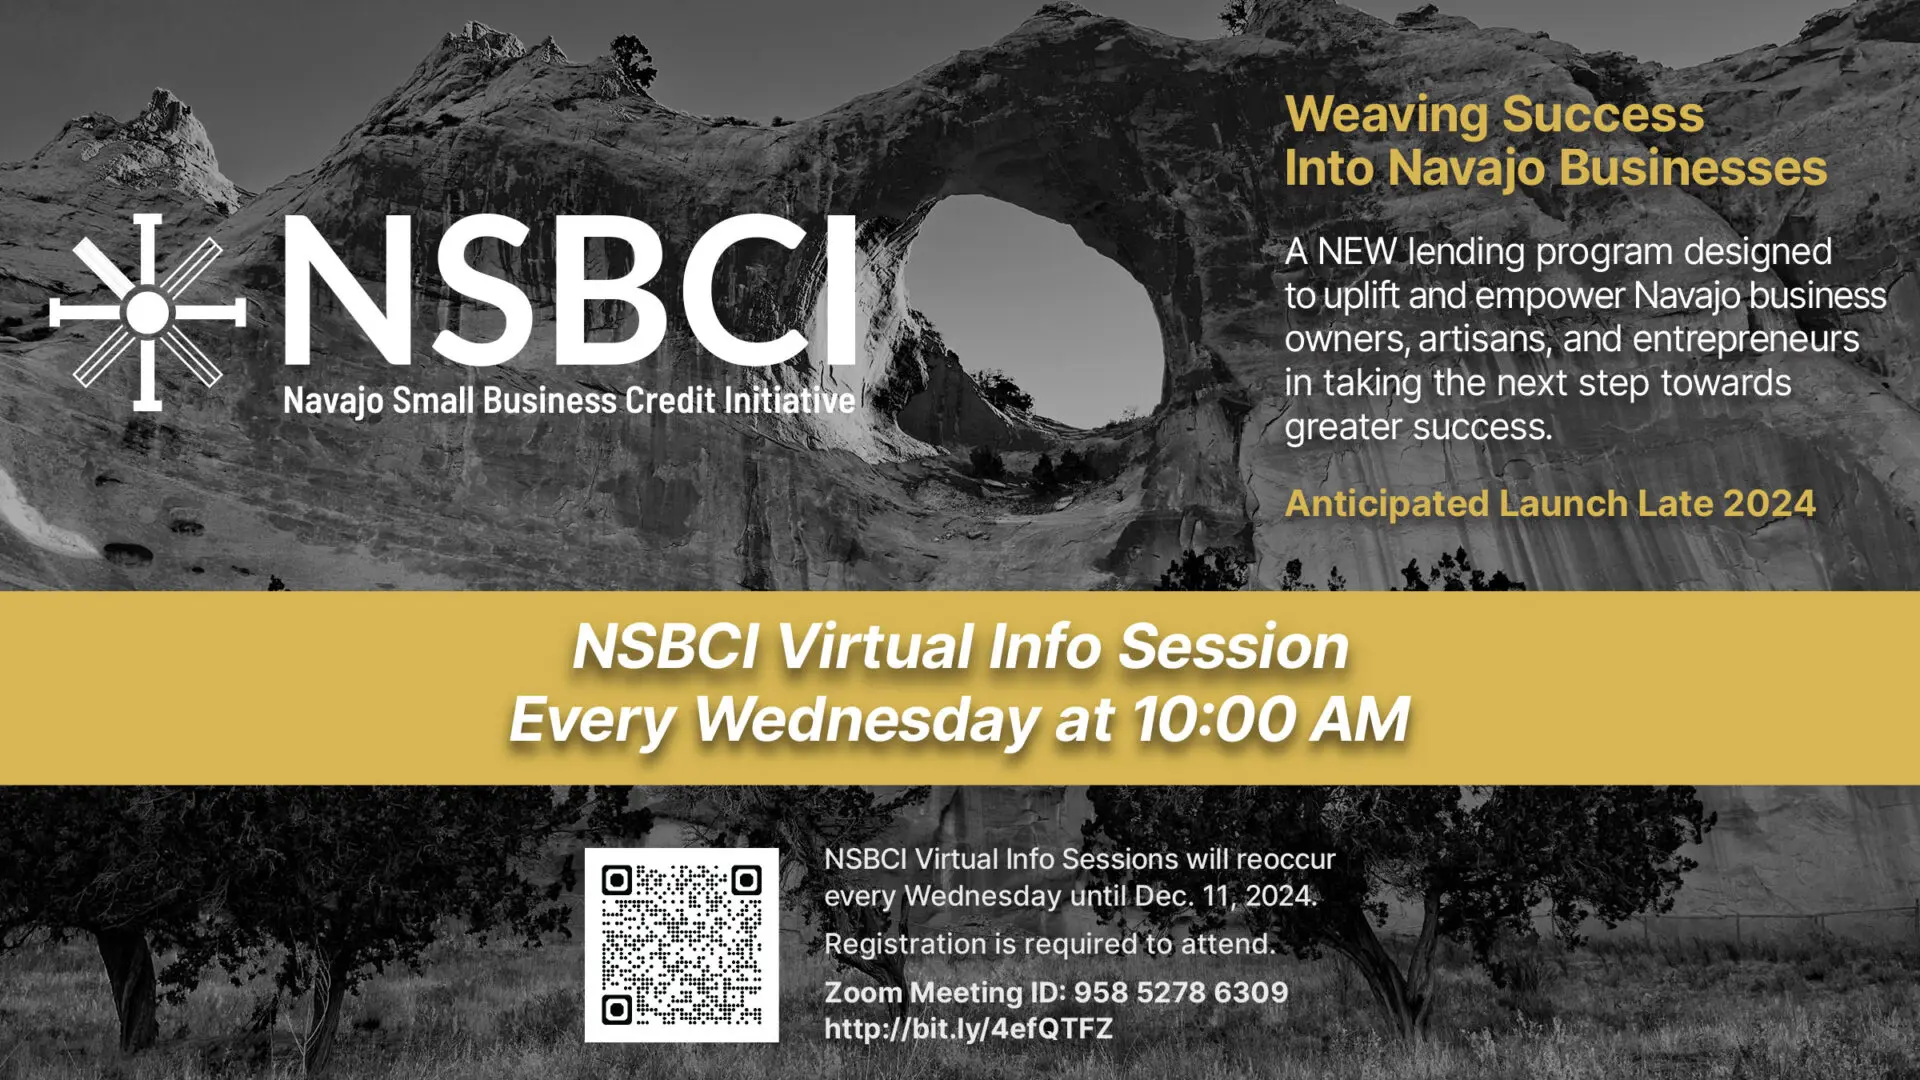 NSBCI Wednesday Weekly Info Sessions